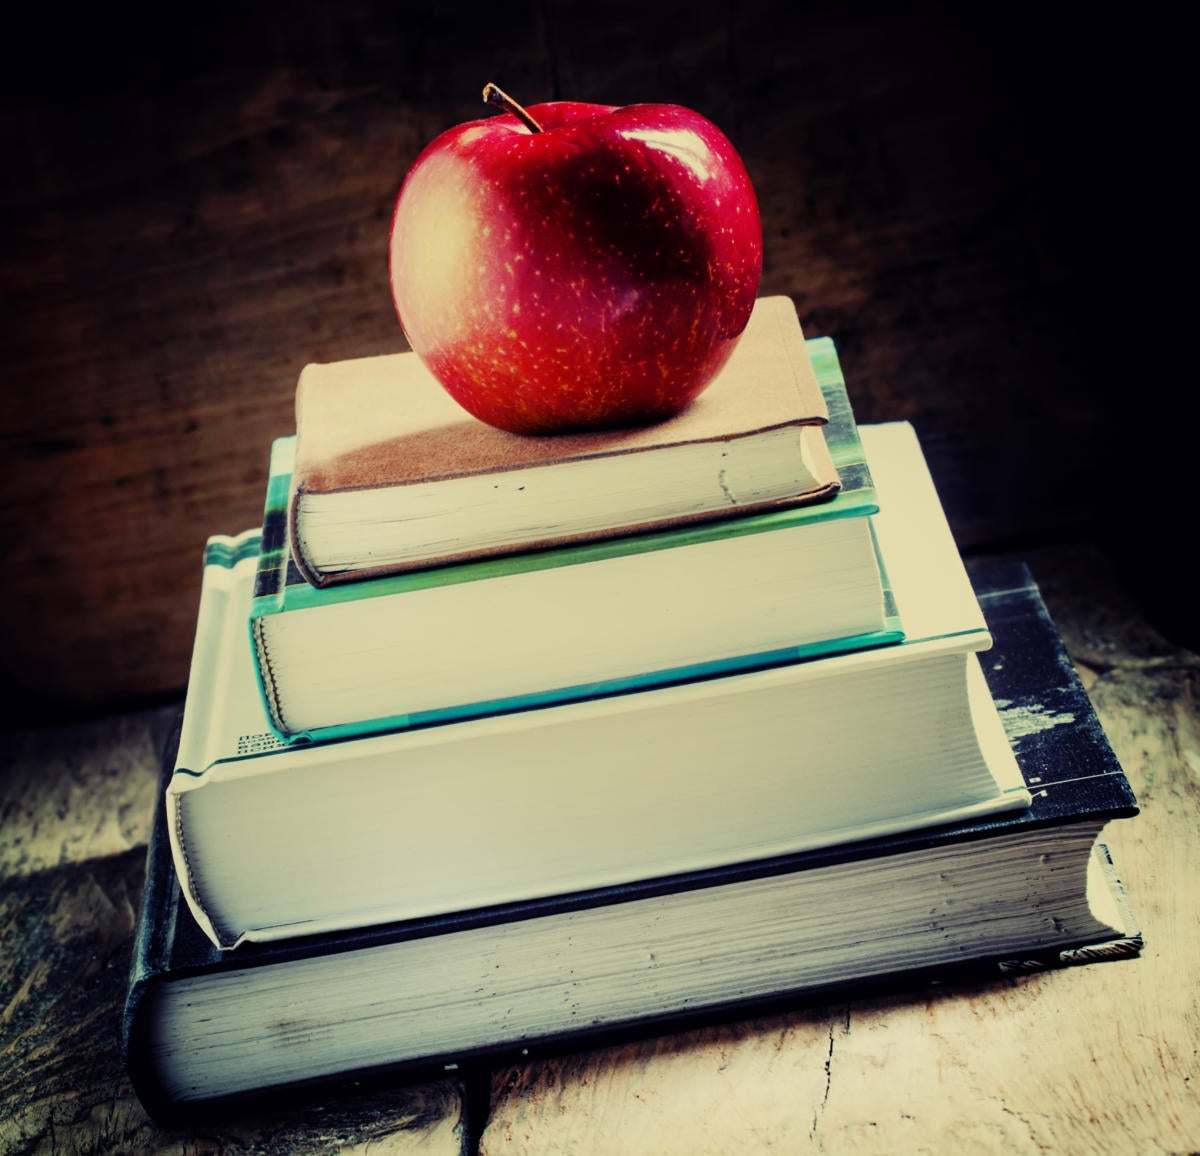 Stack of school books on desk with an apple on top